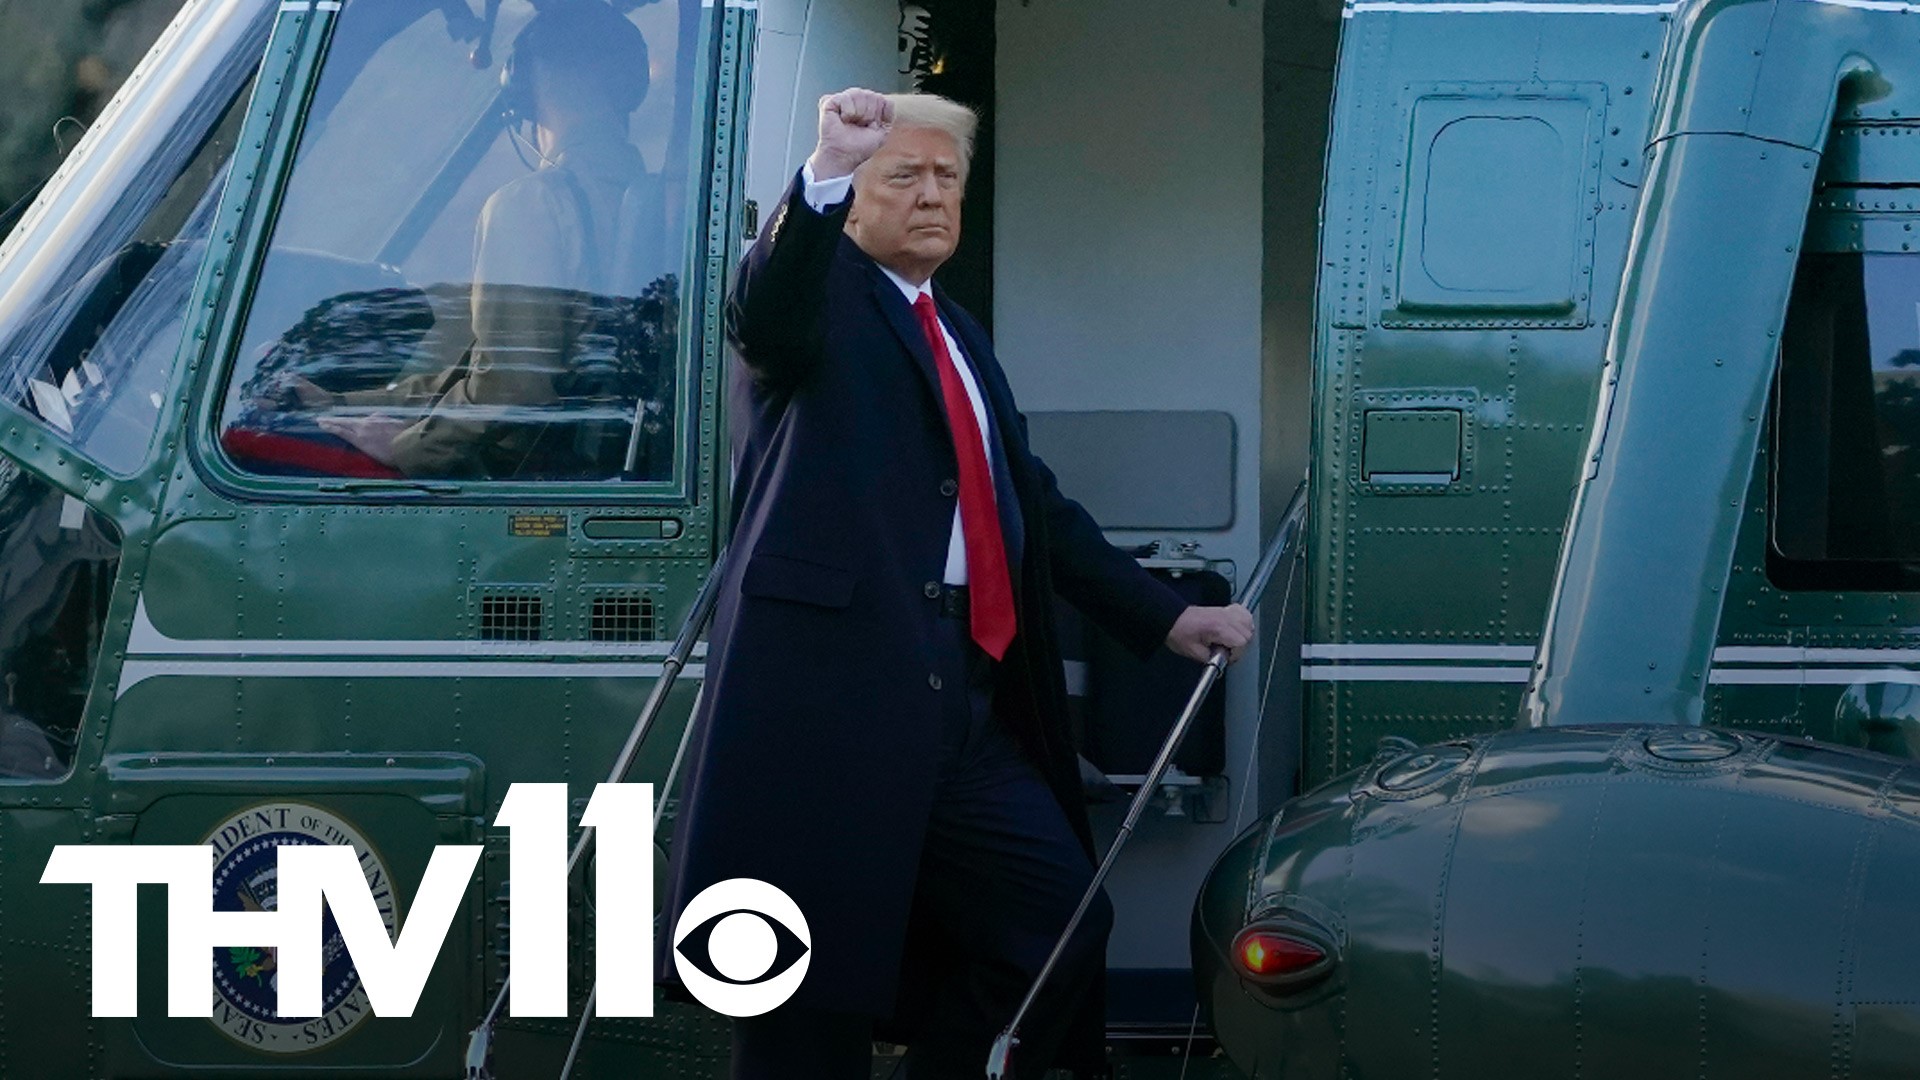 President Donald Trump departed the White House for the last time as President of the United States